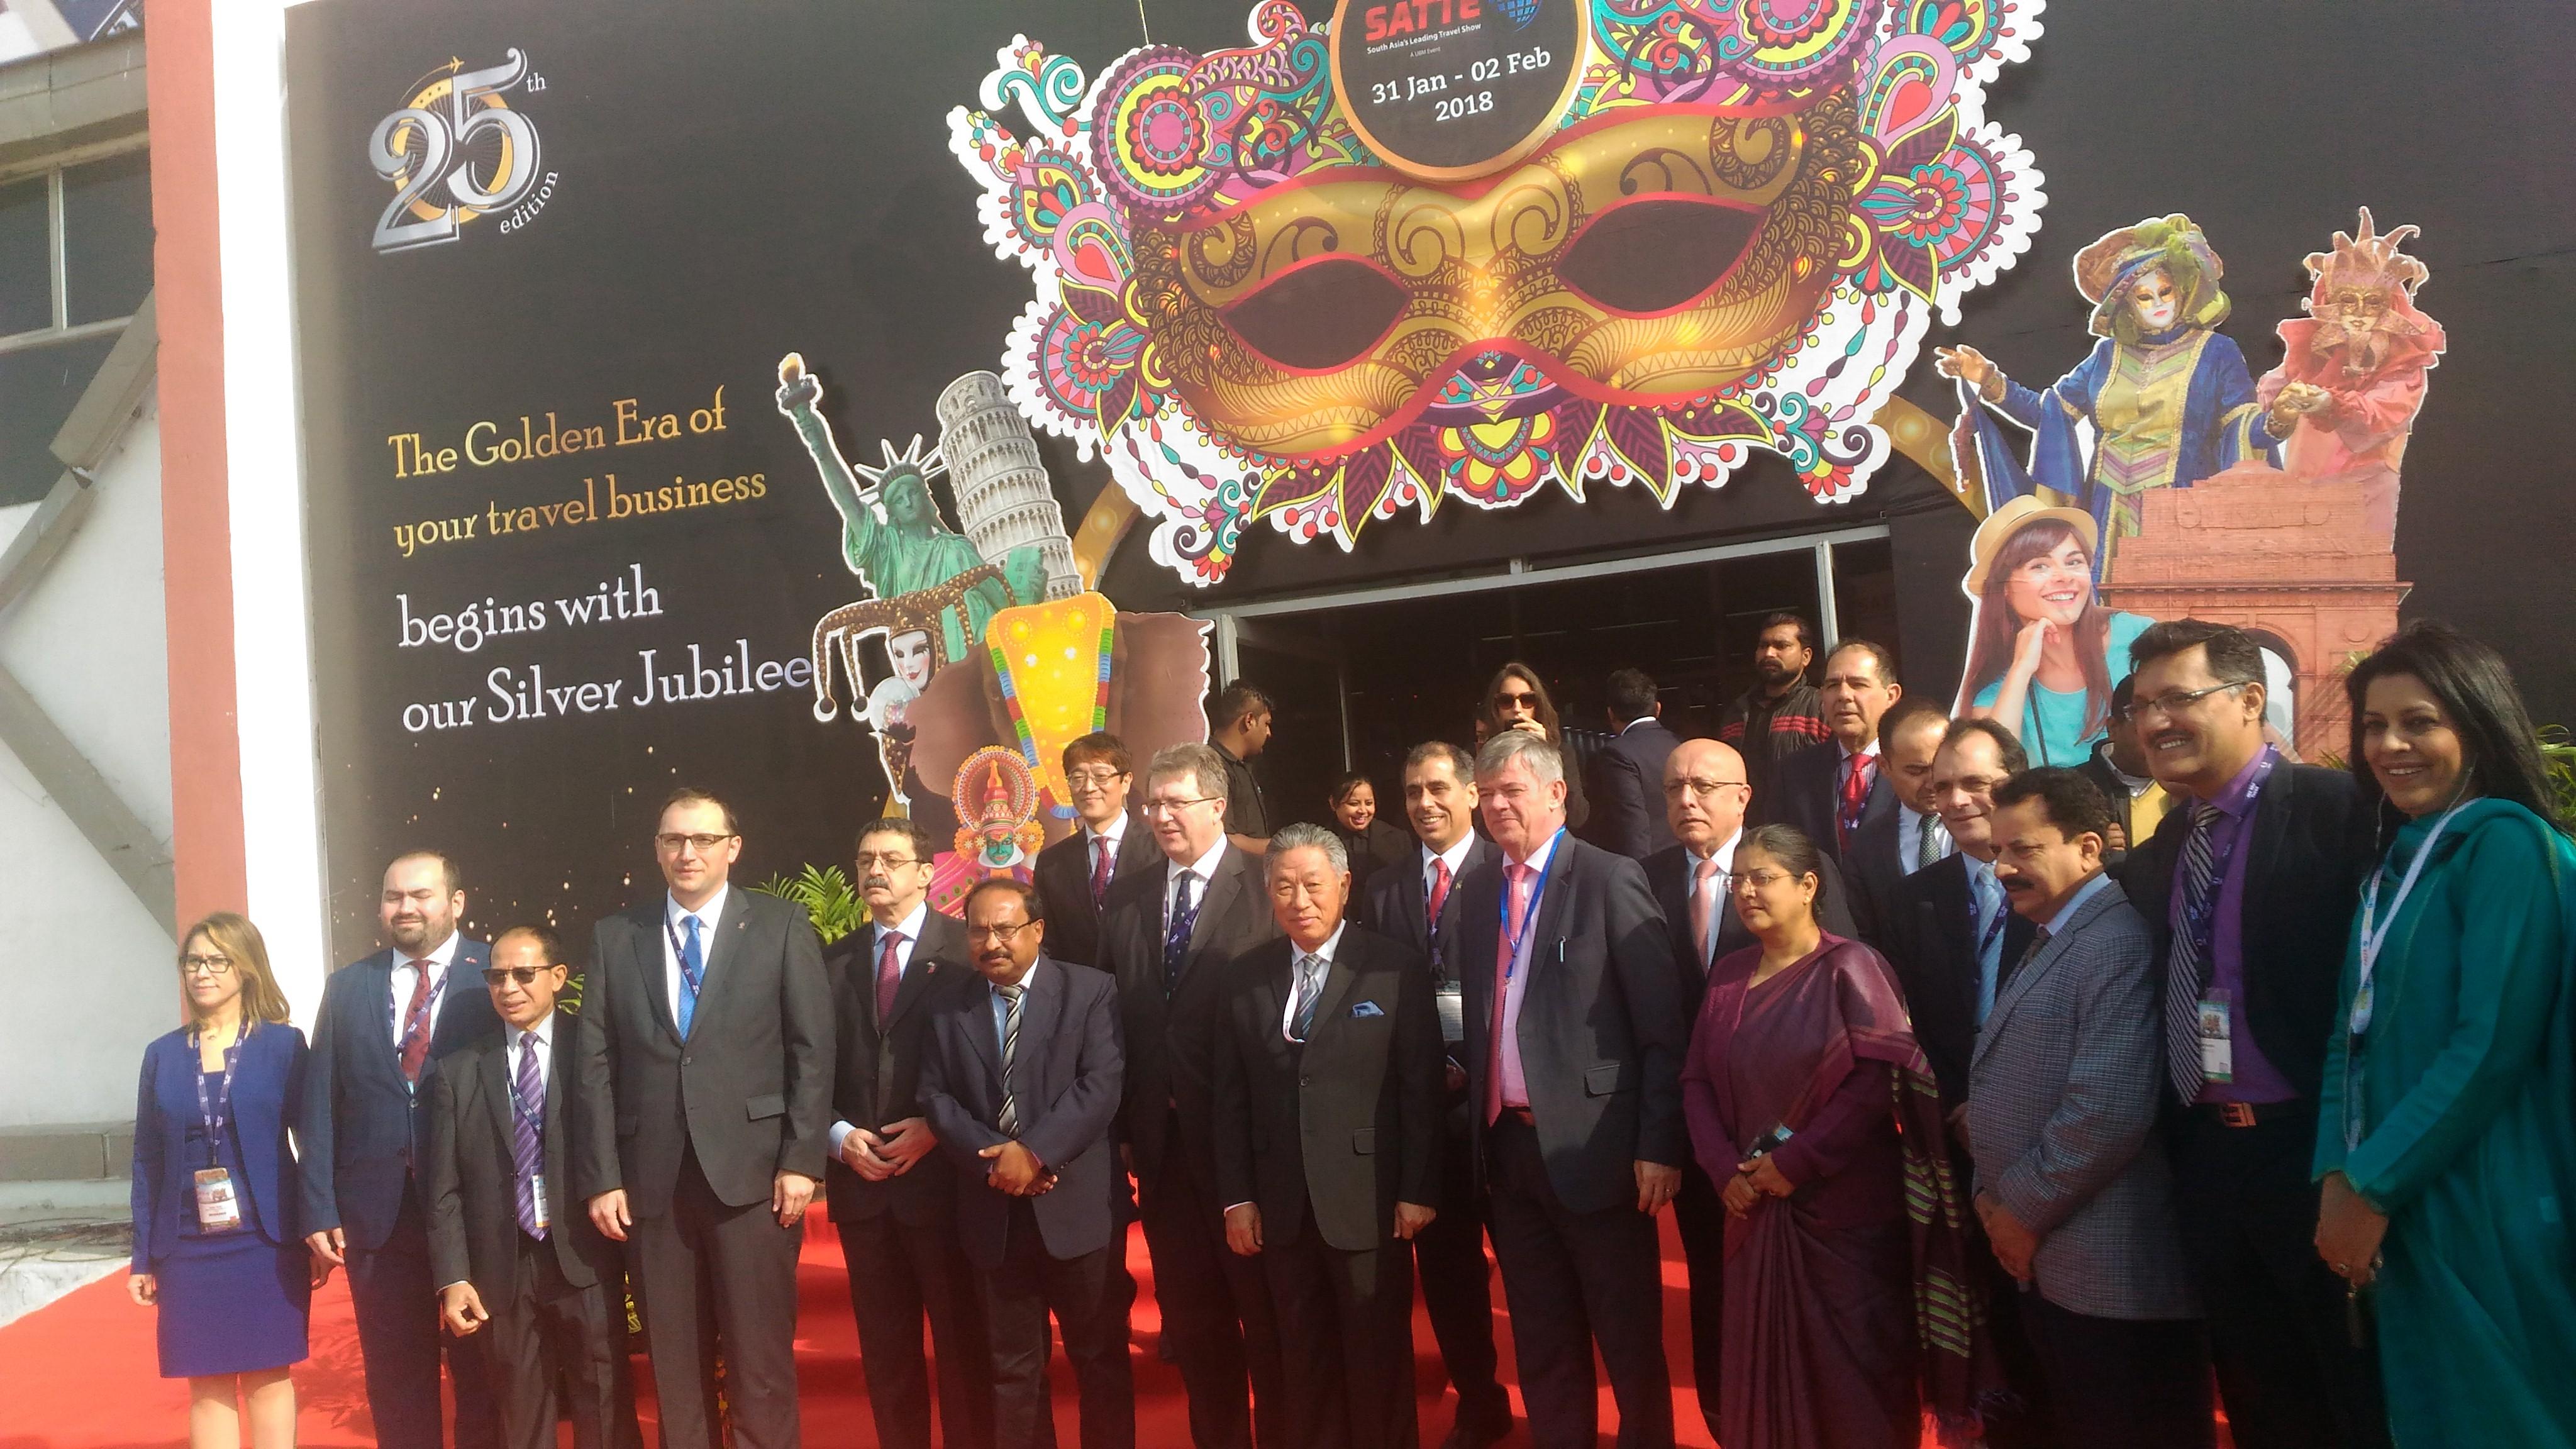 Photos taken after the ribbon cutting of the opening ceremony for SATTE. DY. Tourism Minister of Indonesia (left 3), Turkish Amb. (left 5), Satyajeet Rajan, DG, Ministry of Tourism, India (left 6), Amb. Tien(center), Mr. Luis Cabello, Commercial Counsellor, Peru (right 8), Czech Republic Amb. (right 7) and Peru Amb.(right 6).